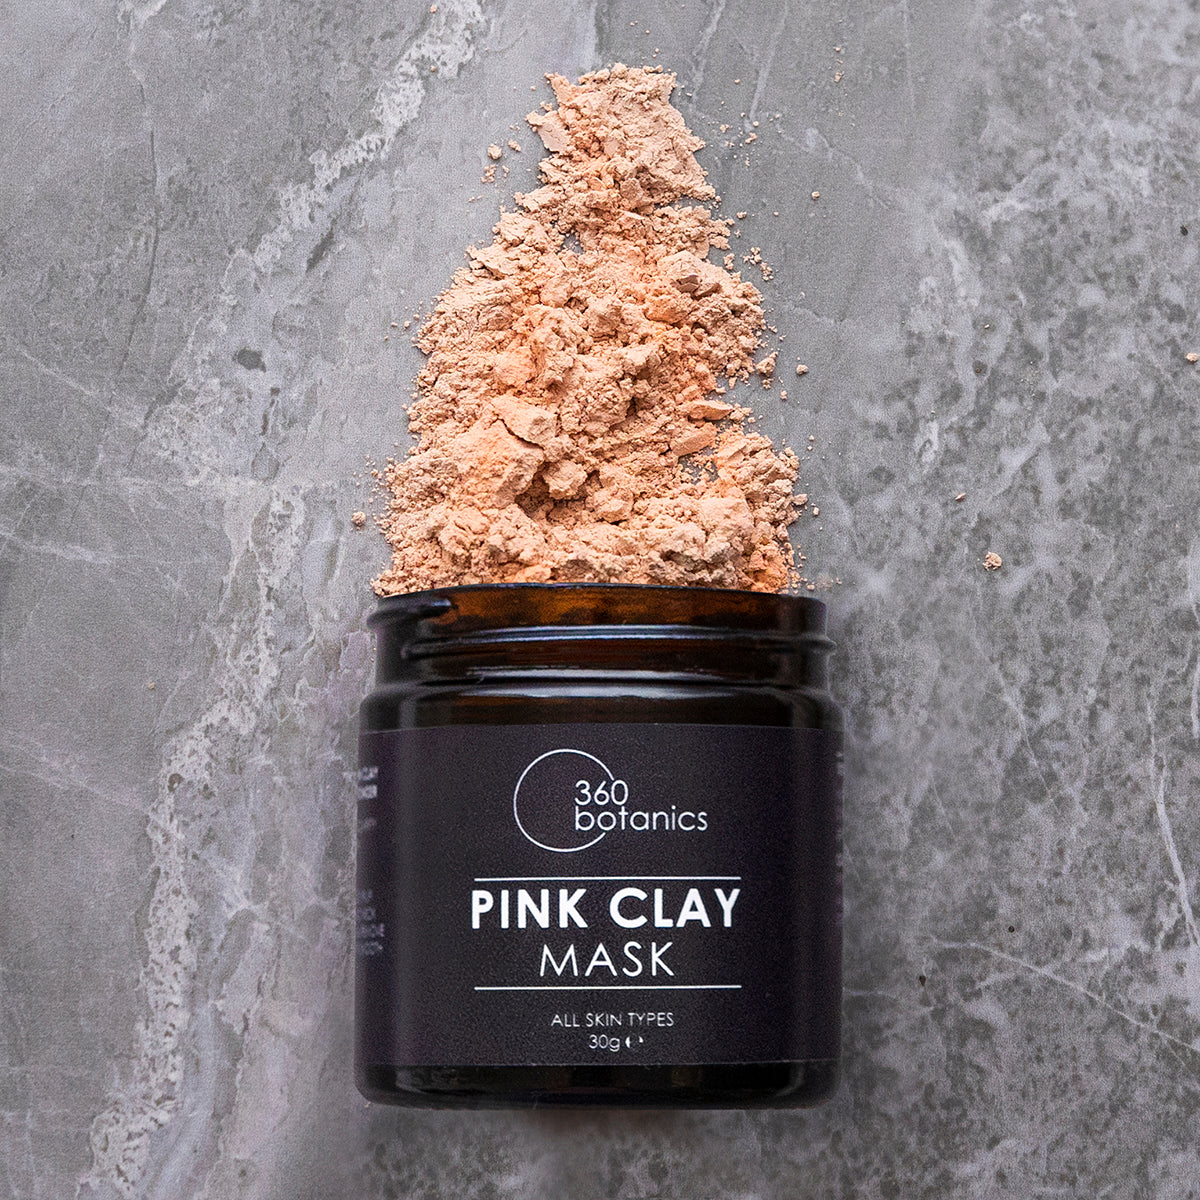 grey marble background, brown jar on its side pink powder coming out top-pink clay